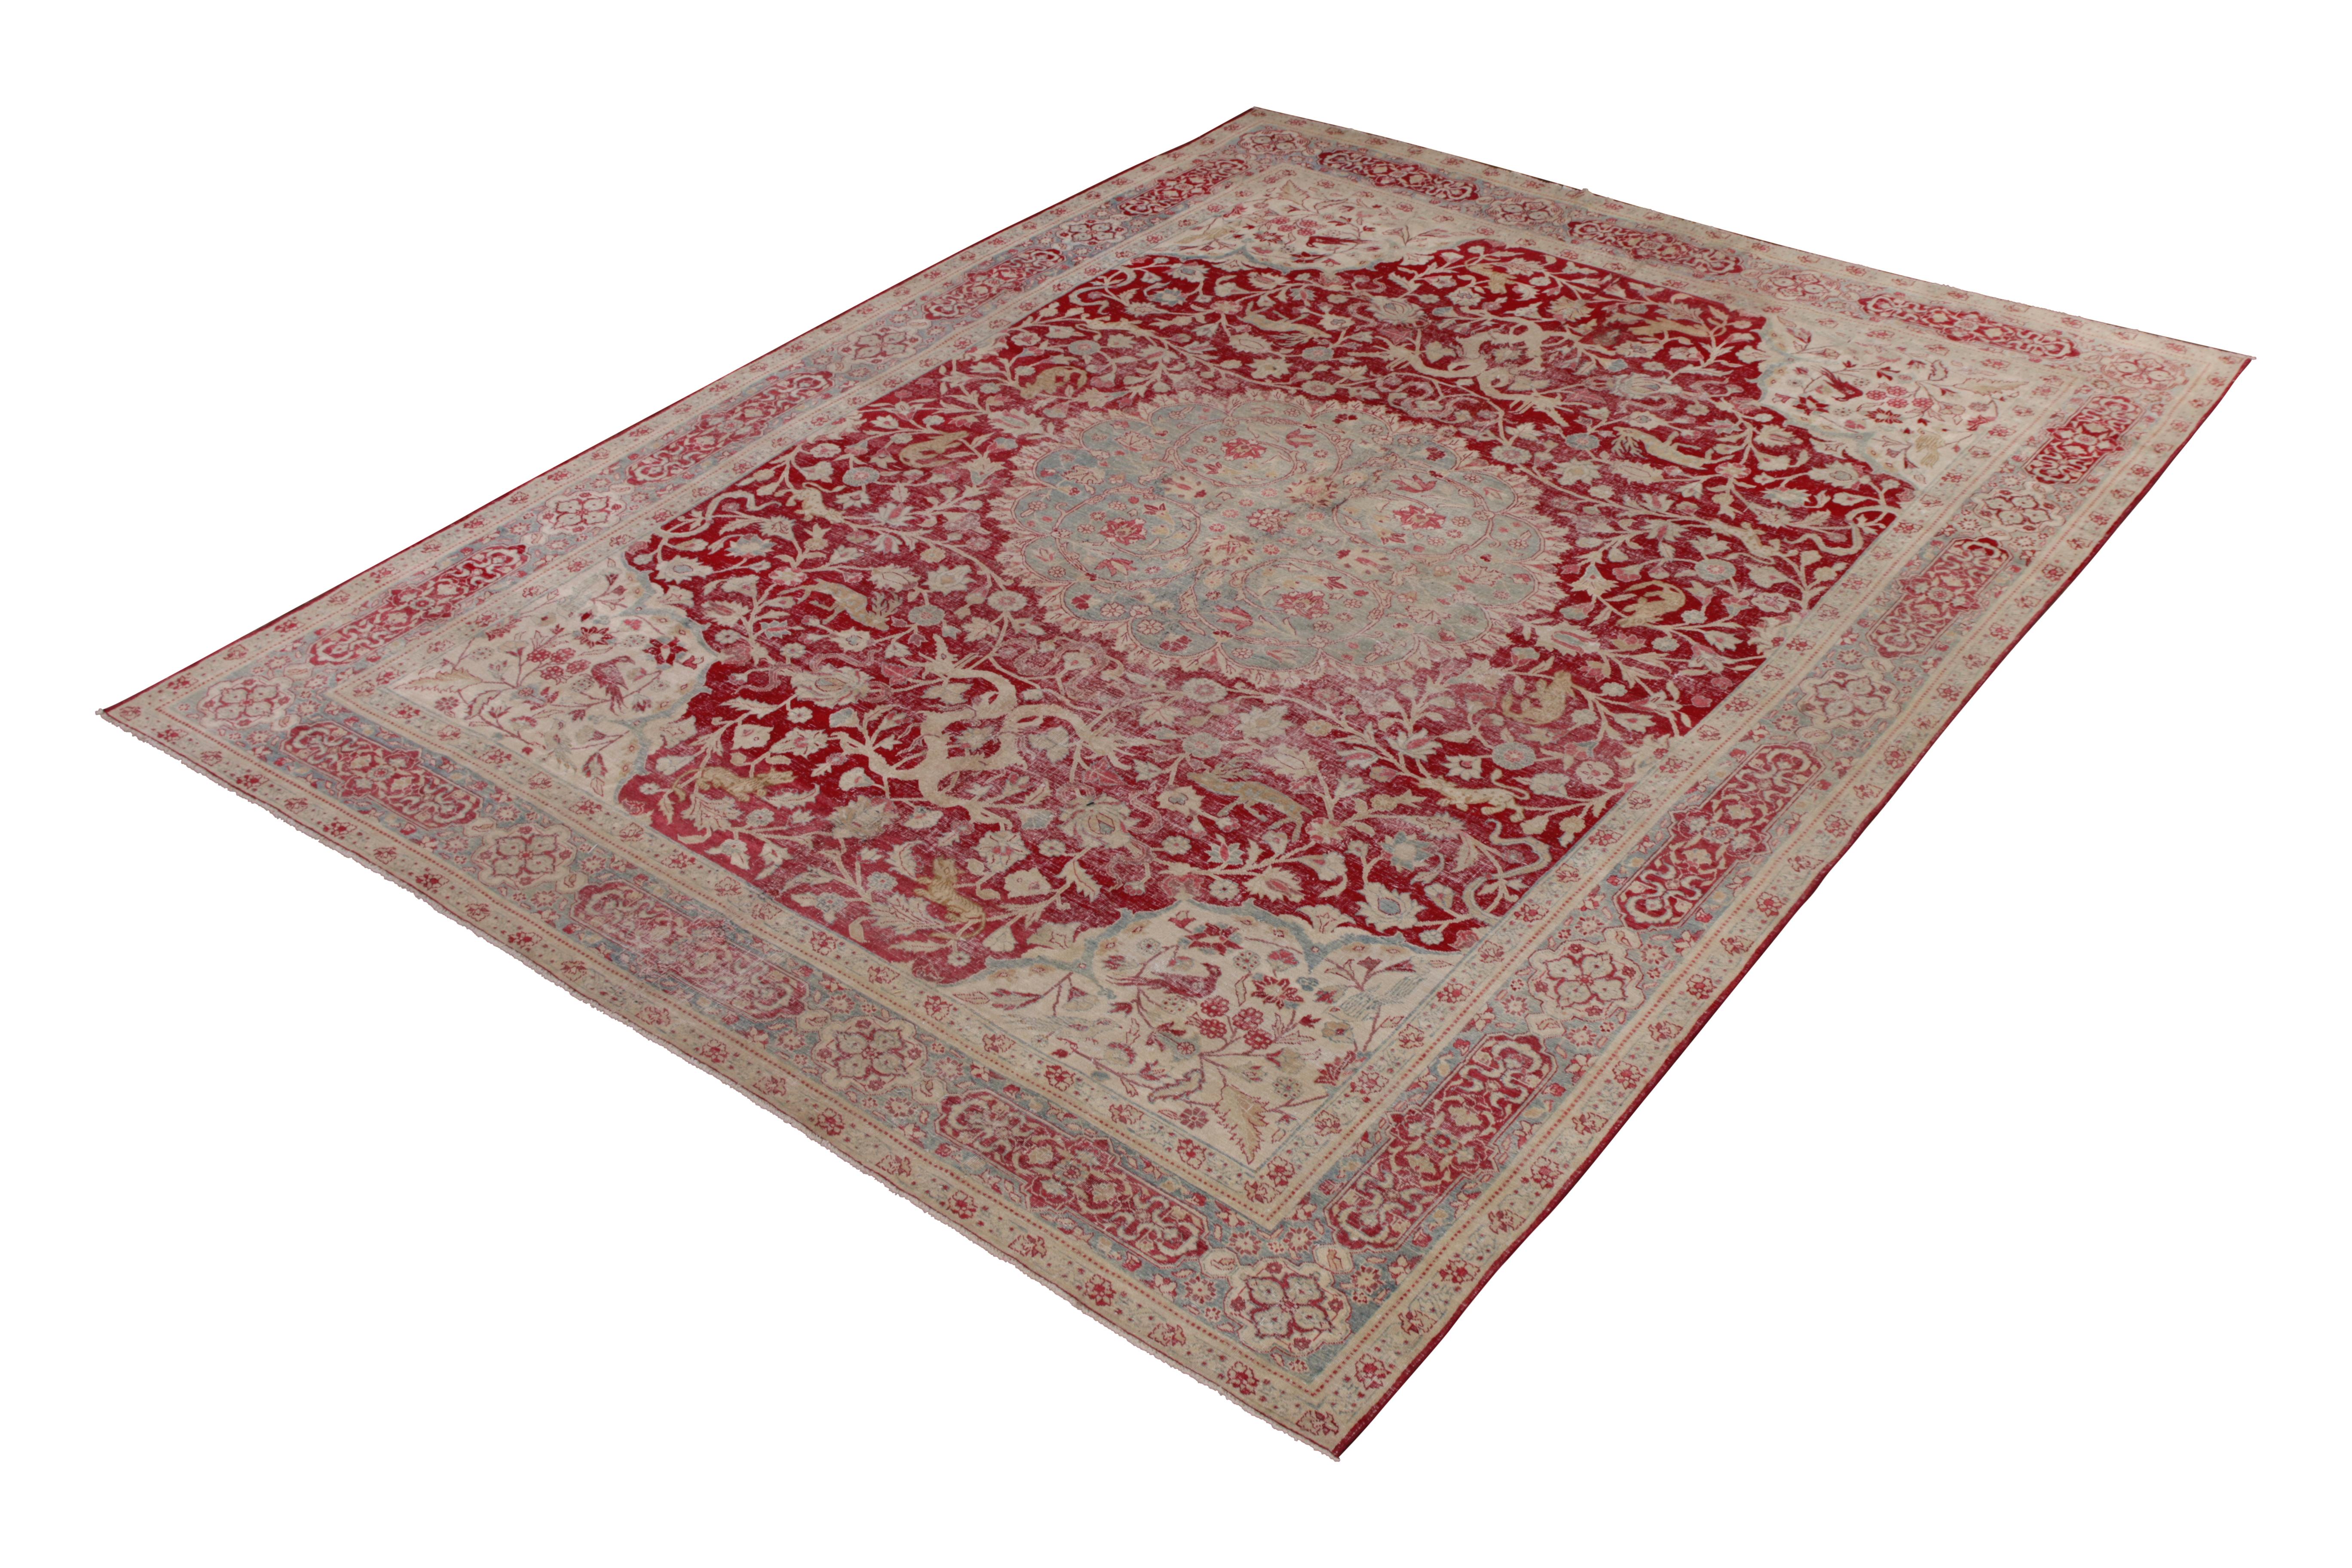 Hand knotted in wool originating from Persia circa 1890-1900, this 19th century antique Persian rug hails from the acclaimed Tabriz capital city, renowned for its quality and in particular for its attention to meticulous, grand medallion patterns